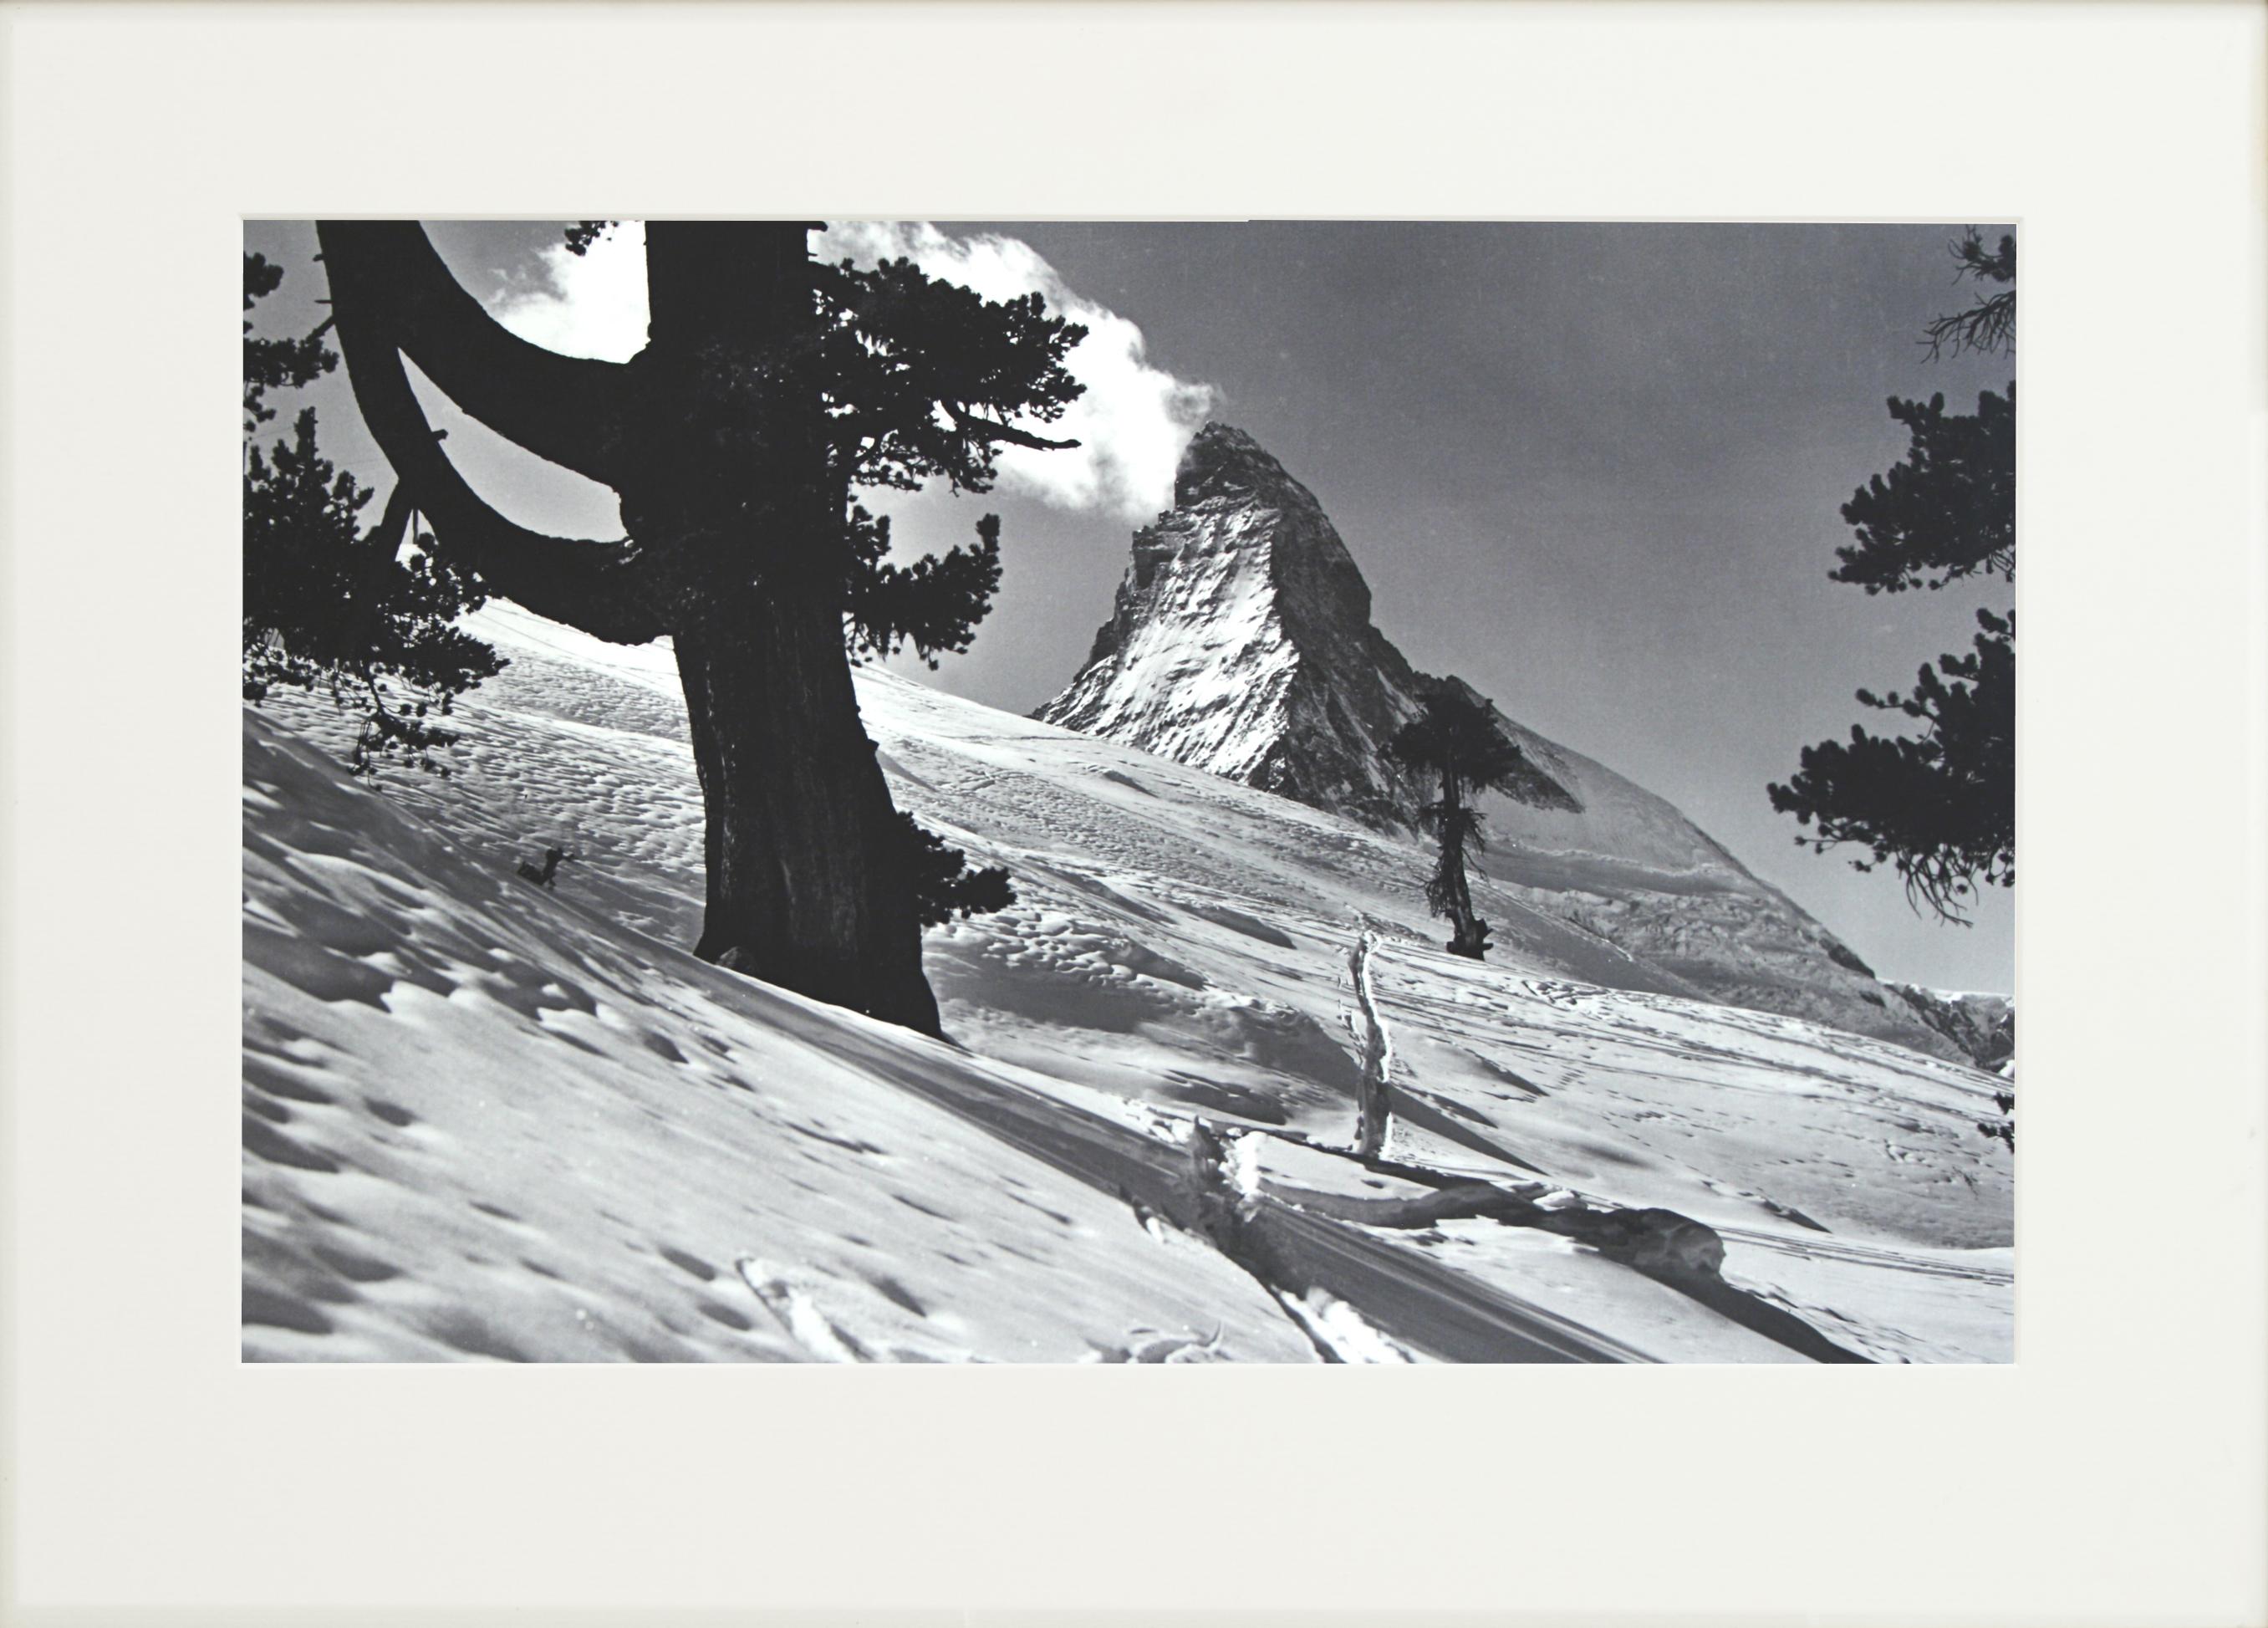 Vintage Ski Photography, antique Alpine Ski Photograph.
'MATTERHORN', a new mounted black and white photographic image after an original 1930's skiing photograph. Black & white alpine photos are the perfect addition to any home or ski lodge, so